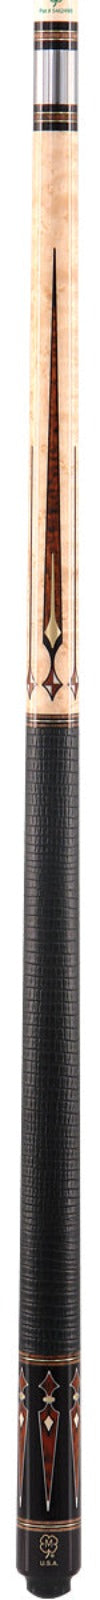 McDermott G803 - Comes with i-2 Shaft Pool Cue